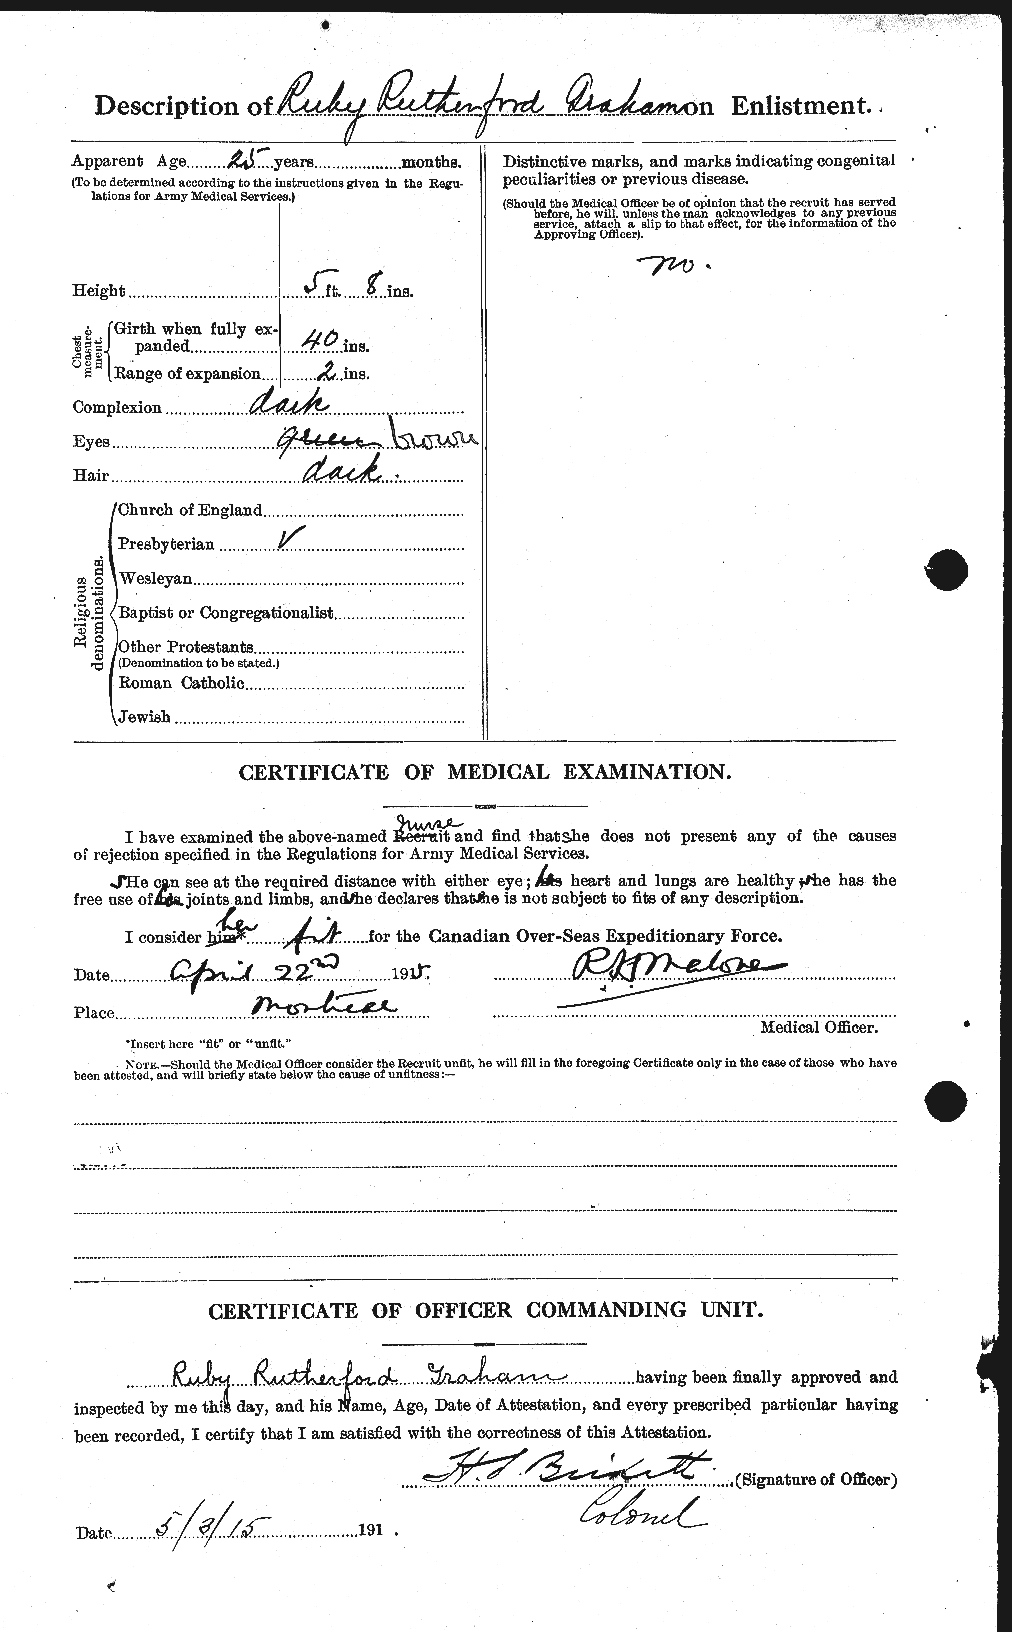 Personnel Records of the First World War - CEF 359443b